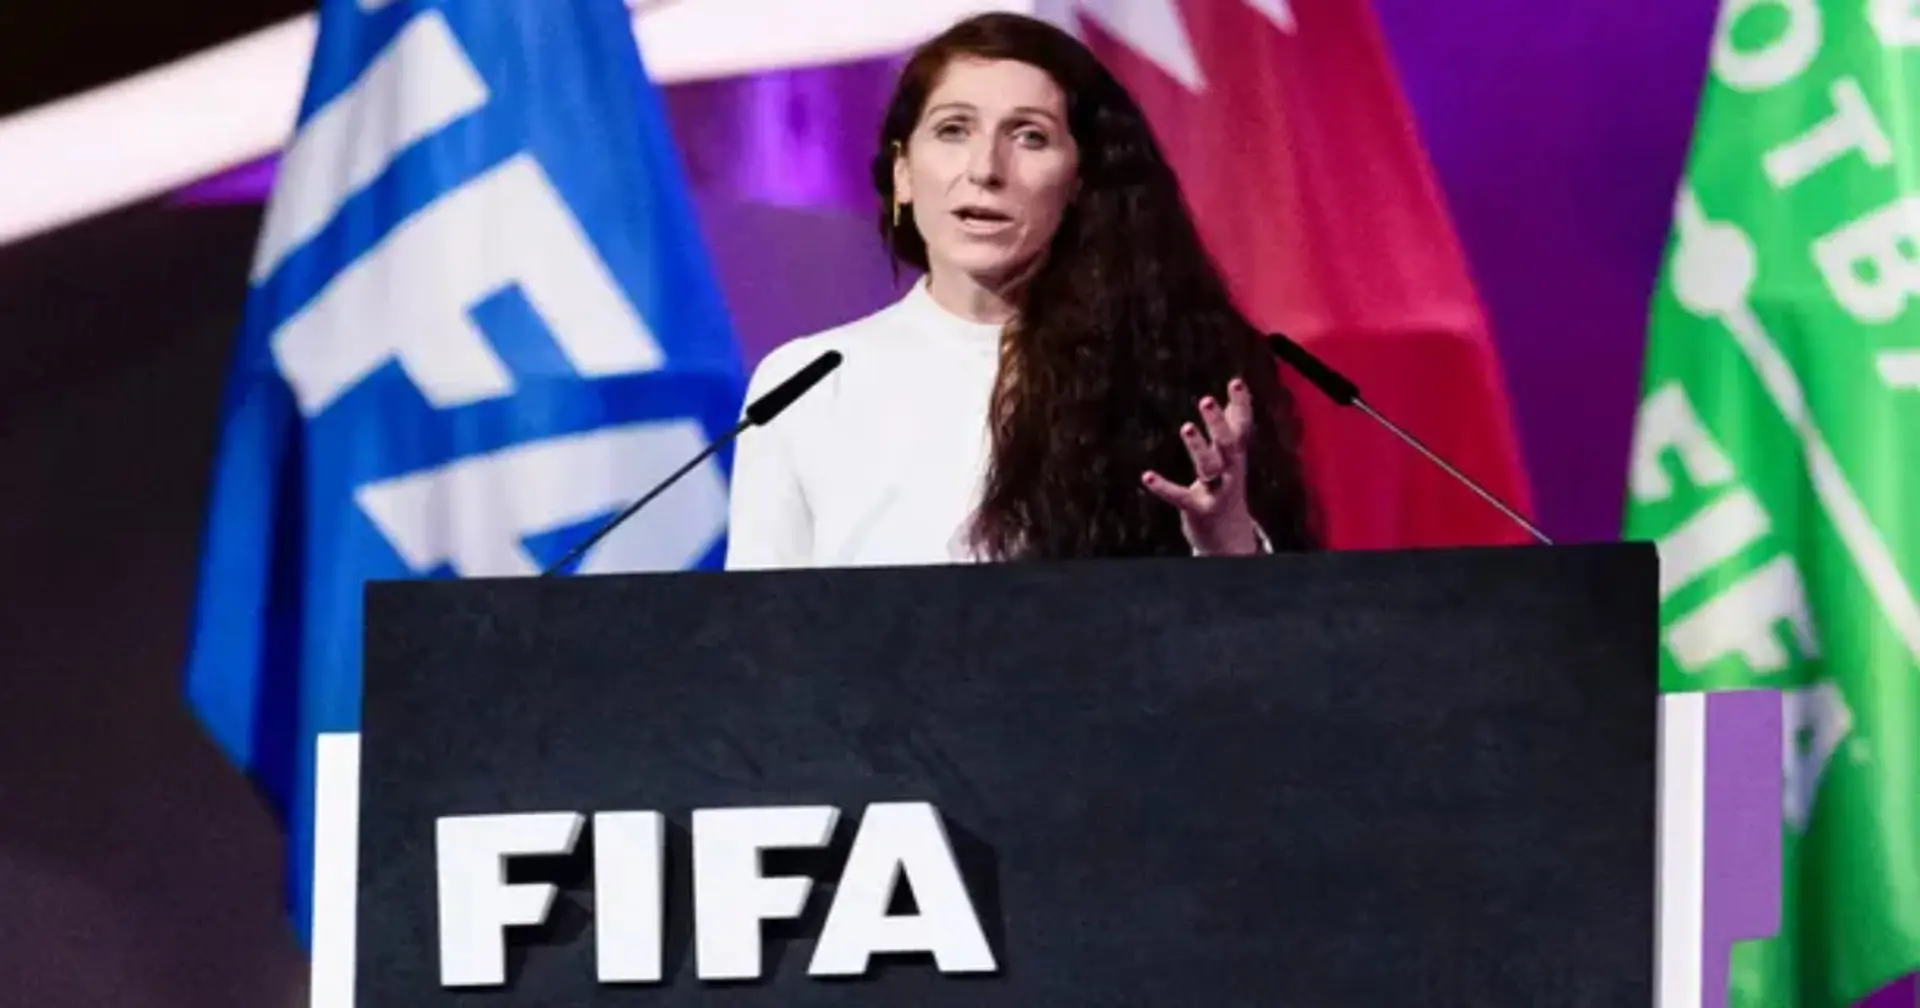 Lesbian president of Norwegian FA: 'The World Cup was awarded to Qatar by FIFA in unacceptable ways'